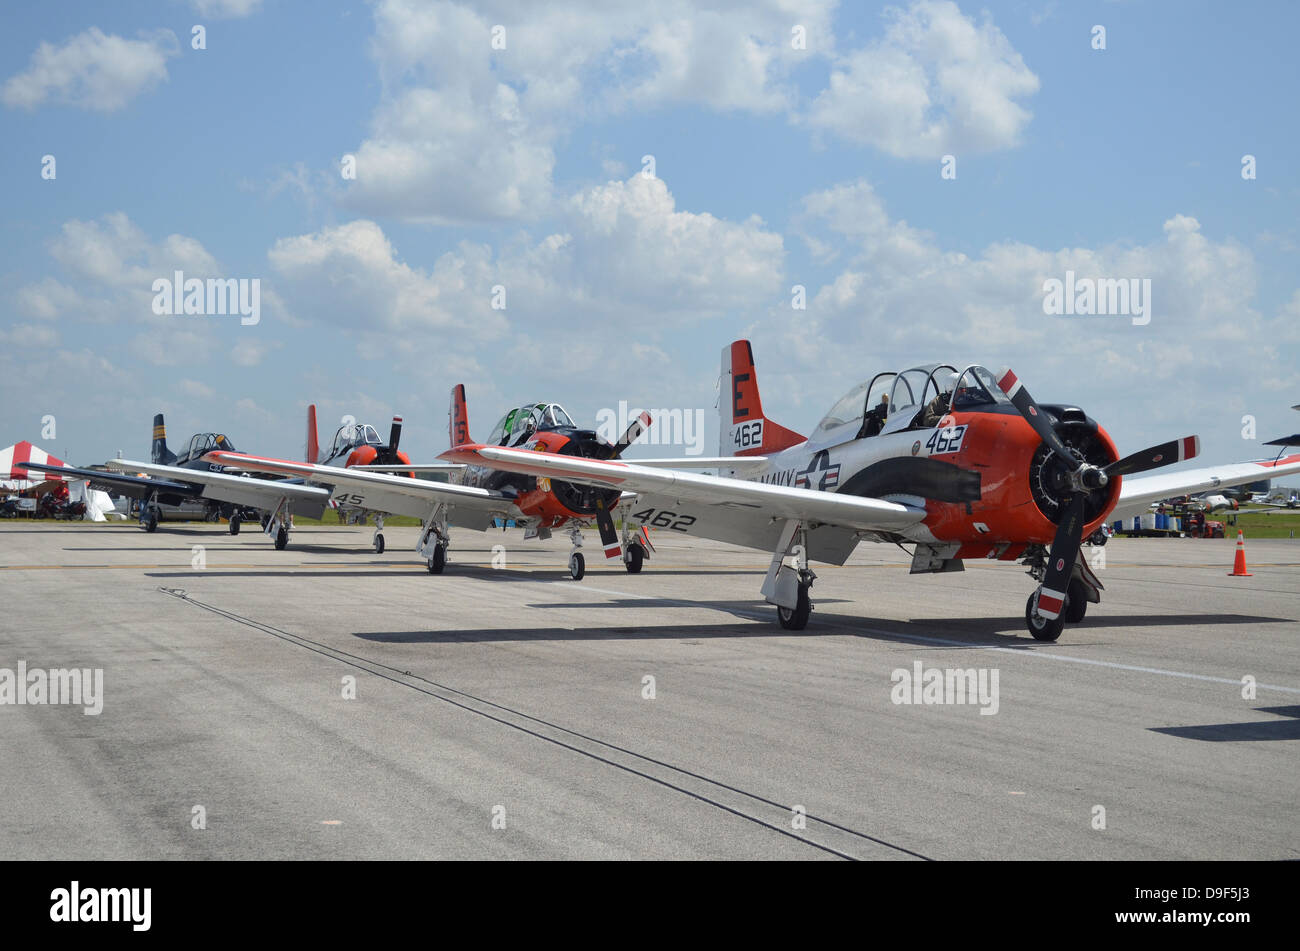 T-28C Trojan aircraft lined up on the flight line after a successful aerobatic showing. Stock Photo